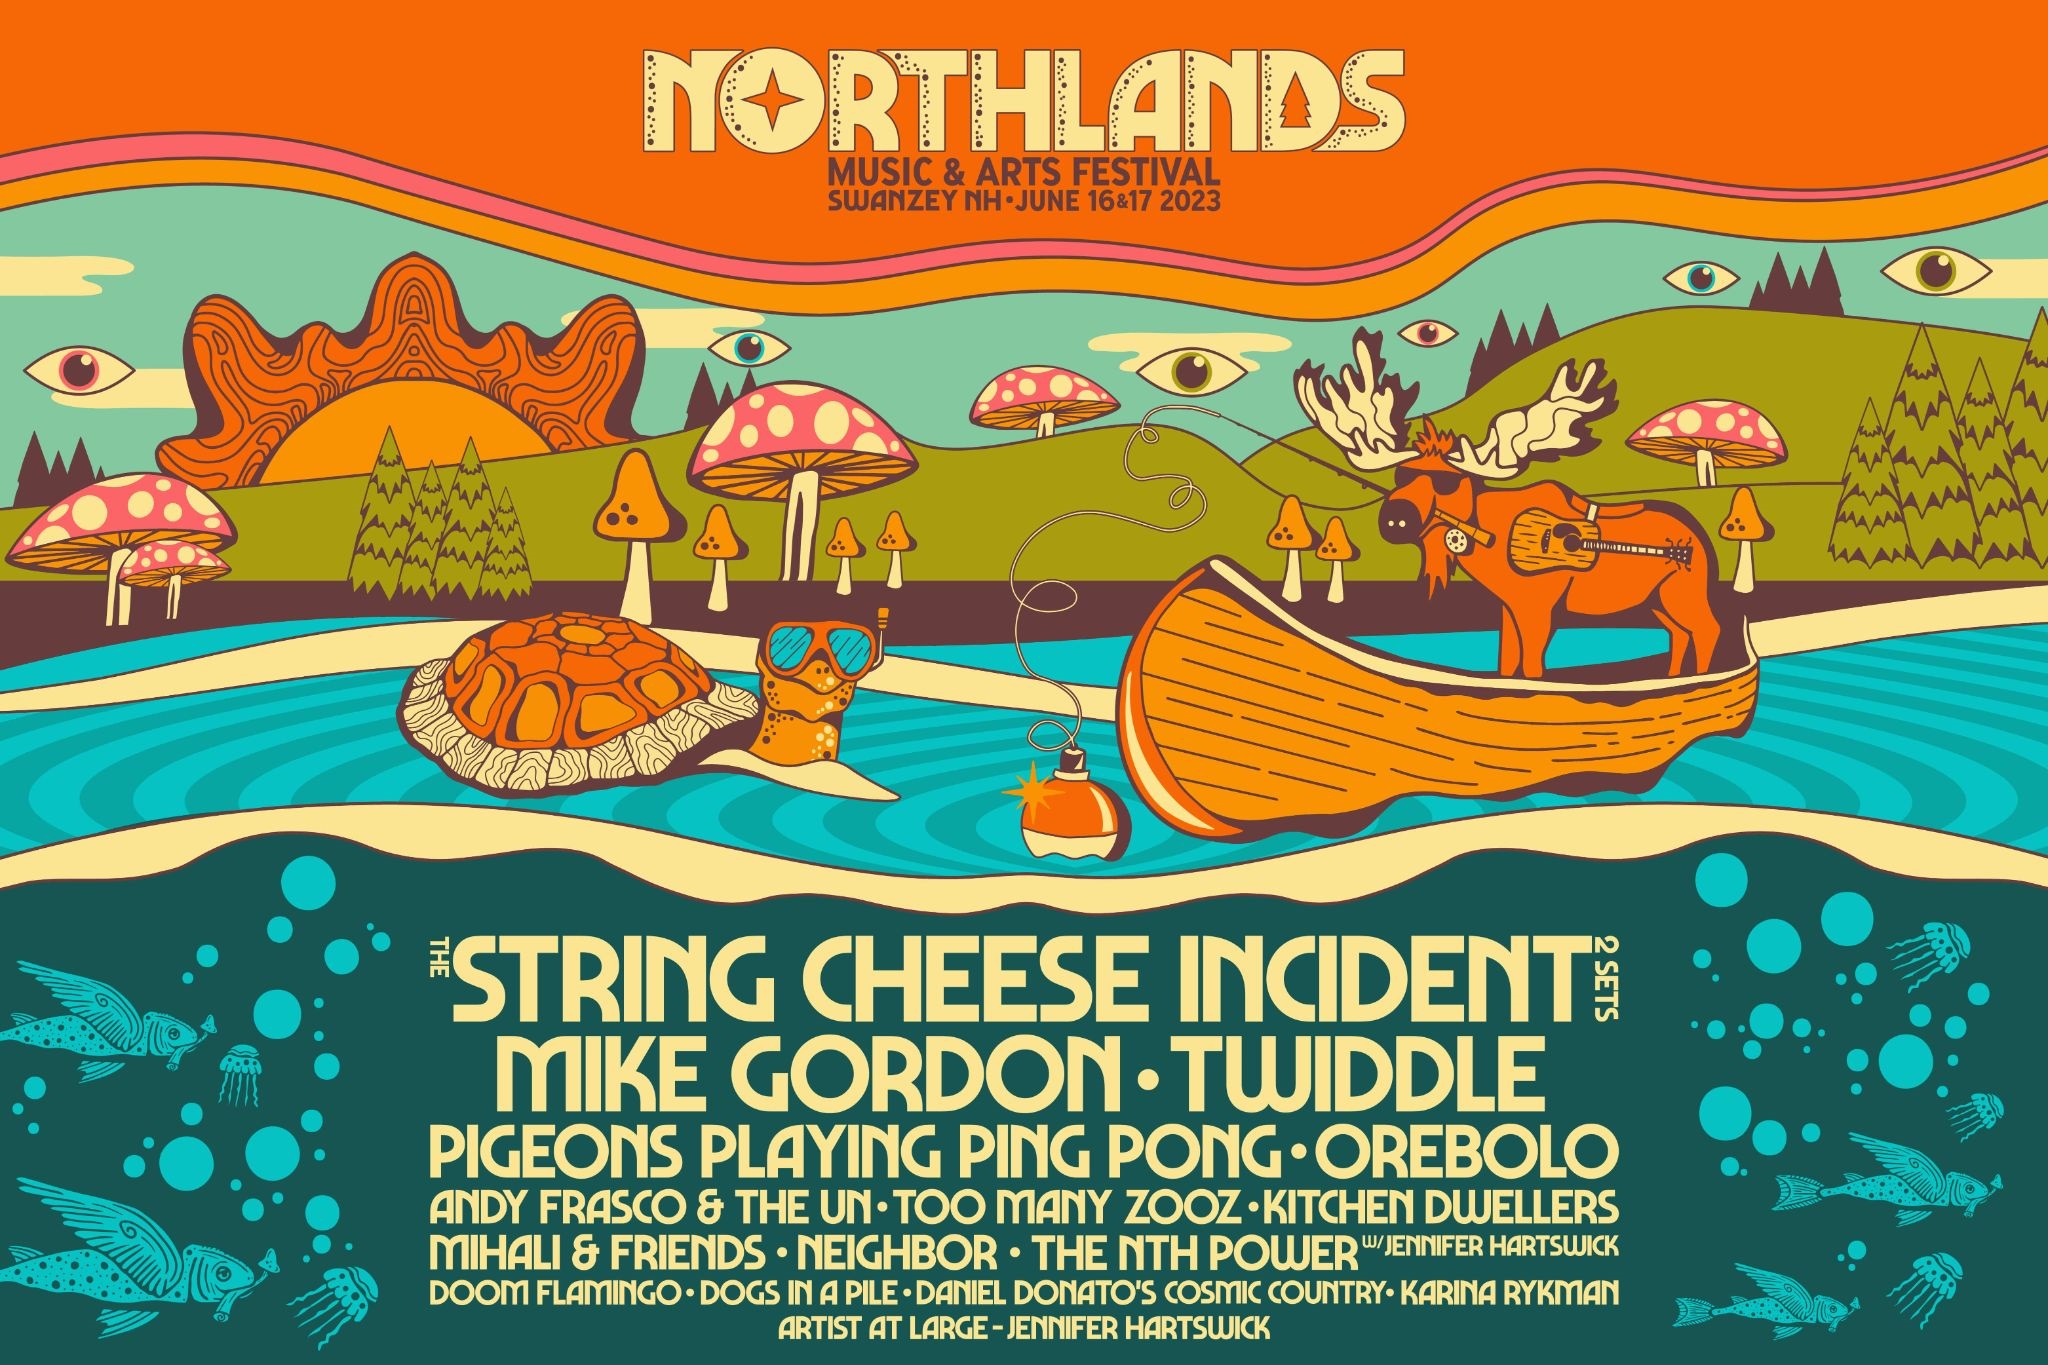 NORTHLANDS MUSIC AND ARTS FESTIVAL UNVEILS STELLAR 2023 LINEUP ADDITIONS